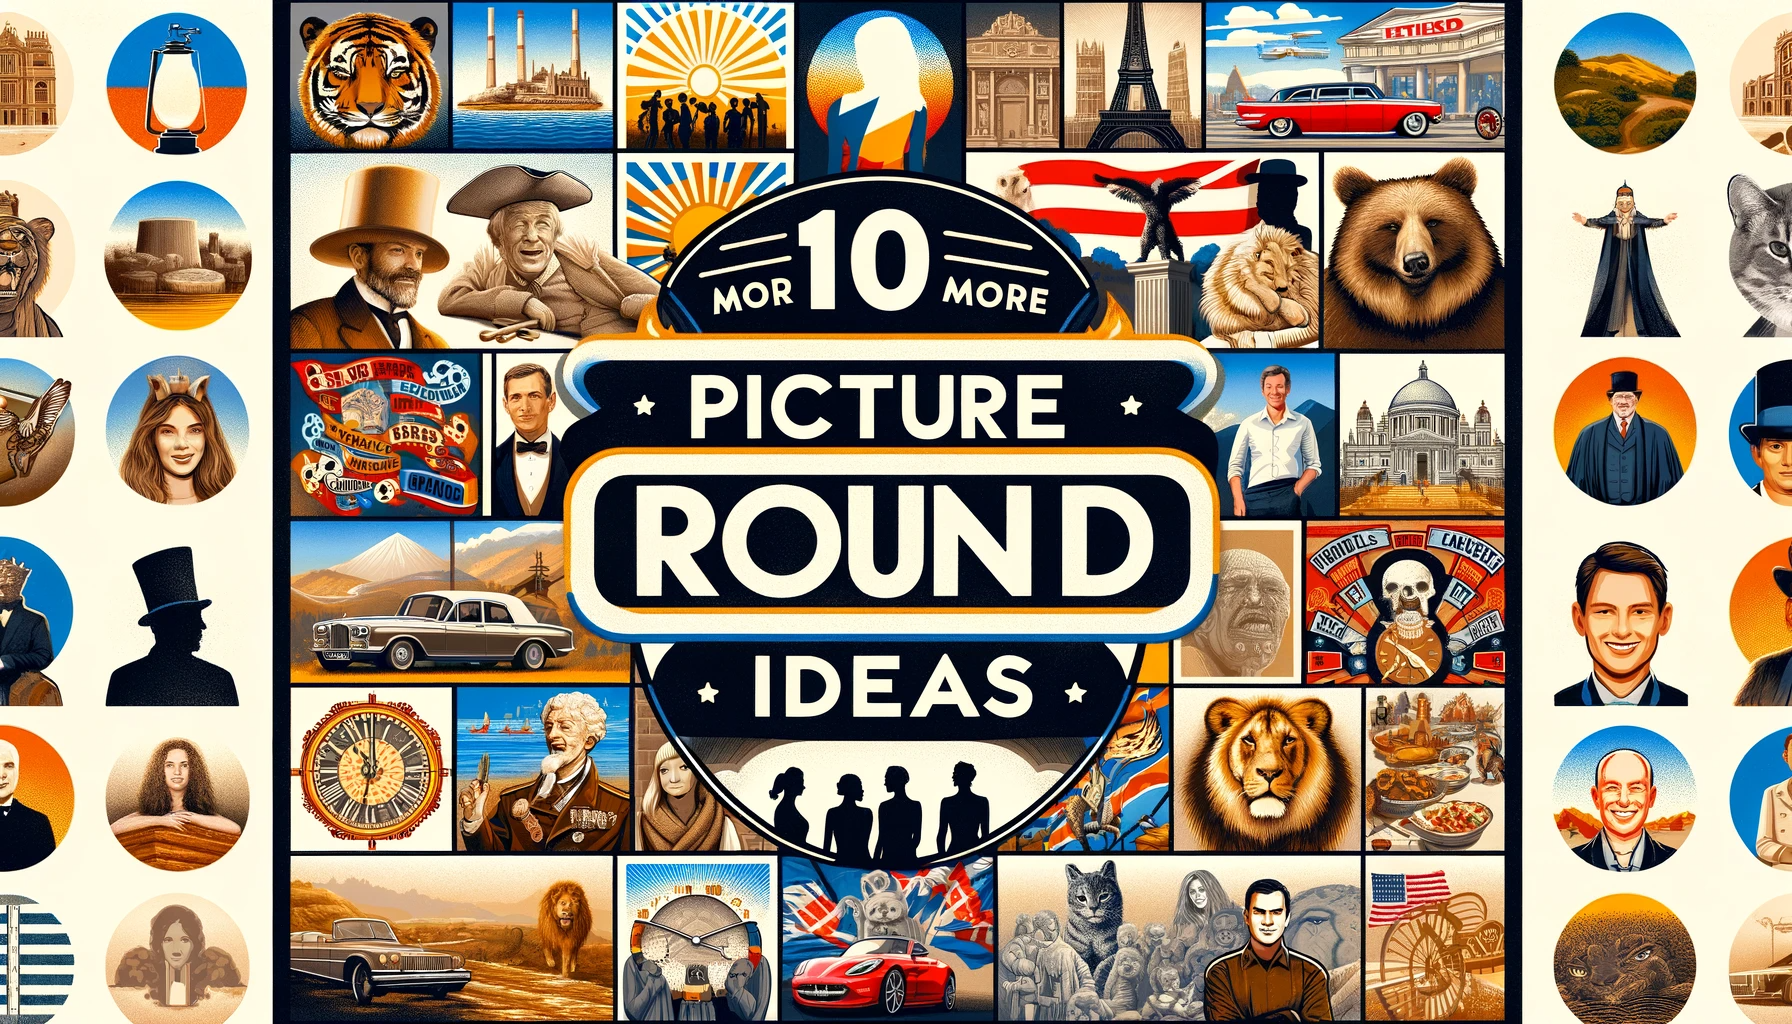 10 MORE GREAT TRIVIA NIGHT PICTURE ROUND IDEAS